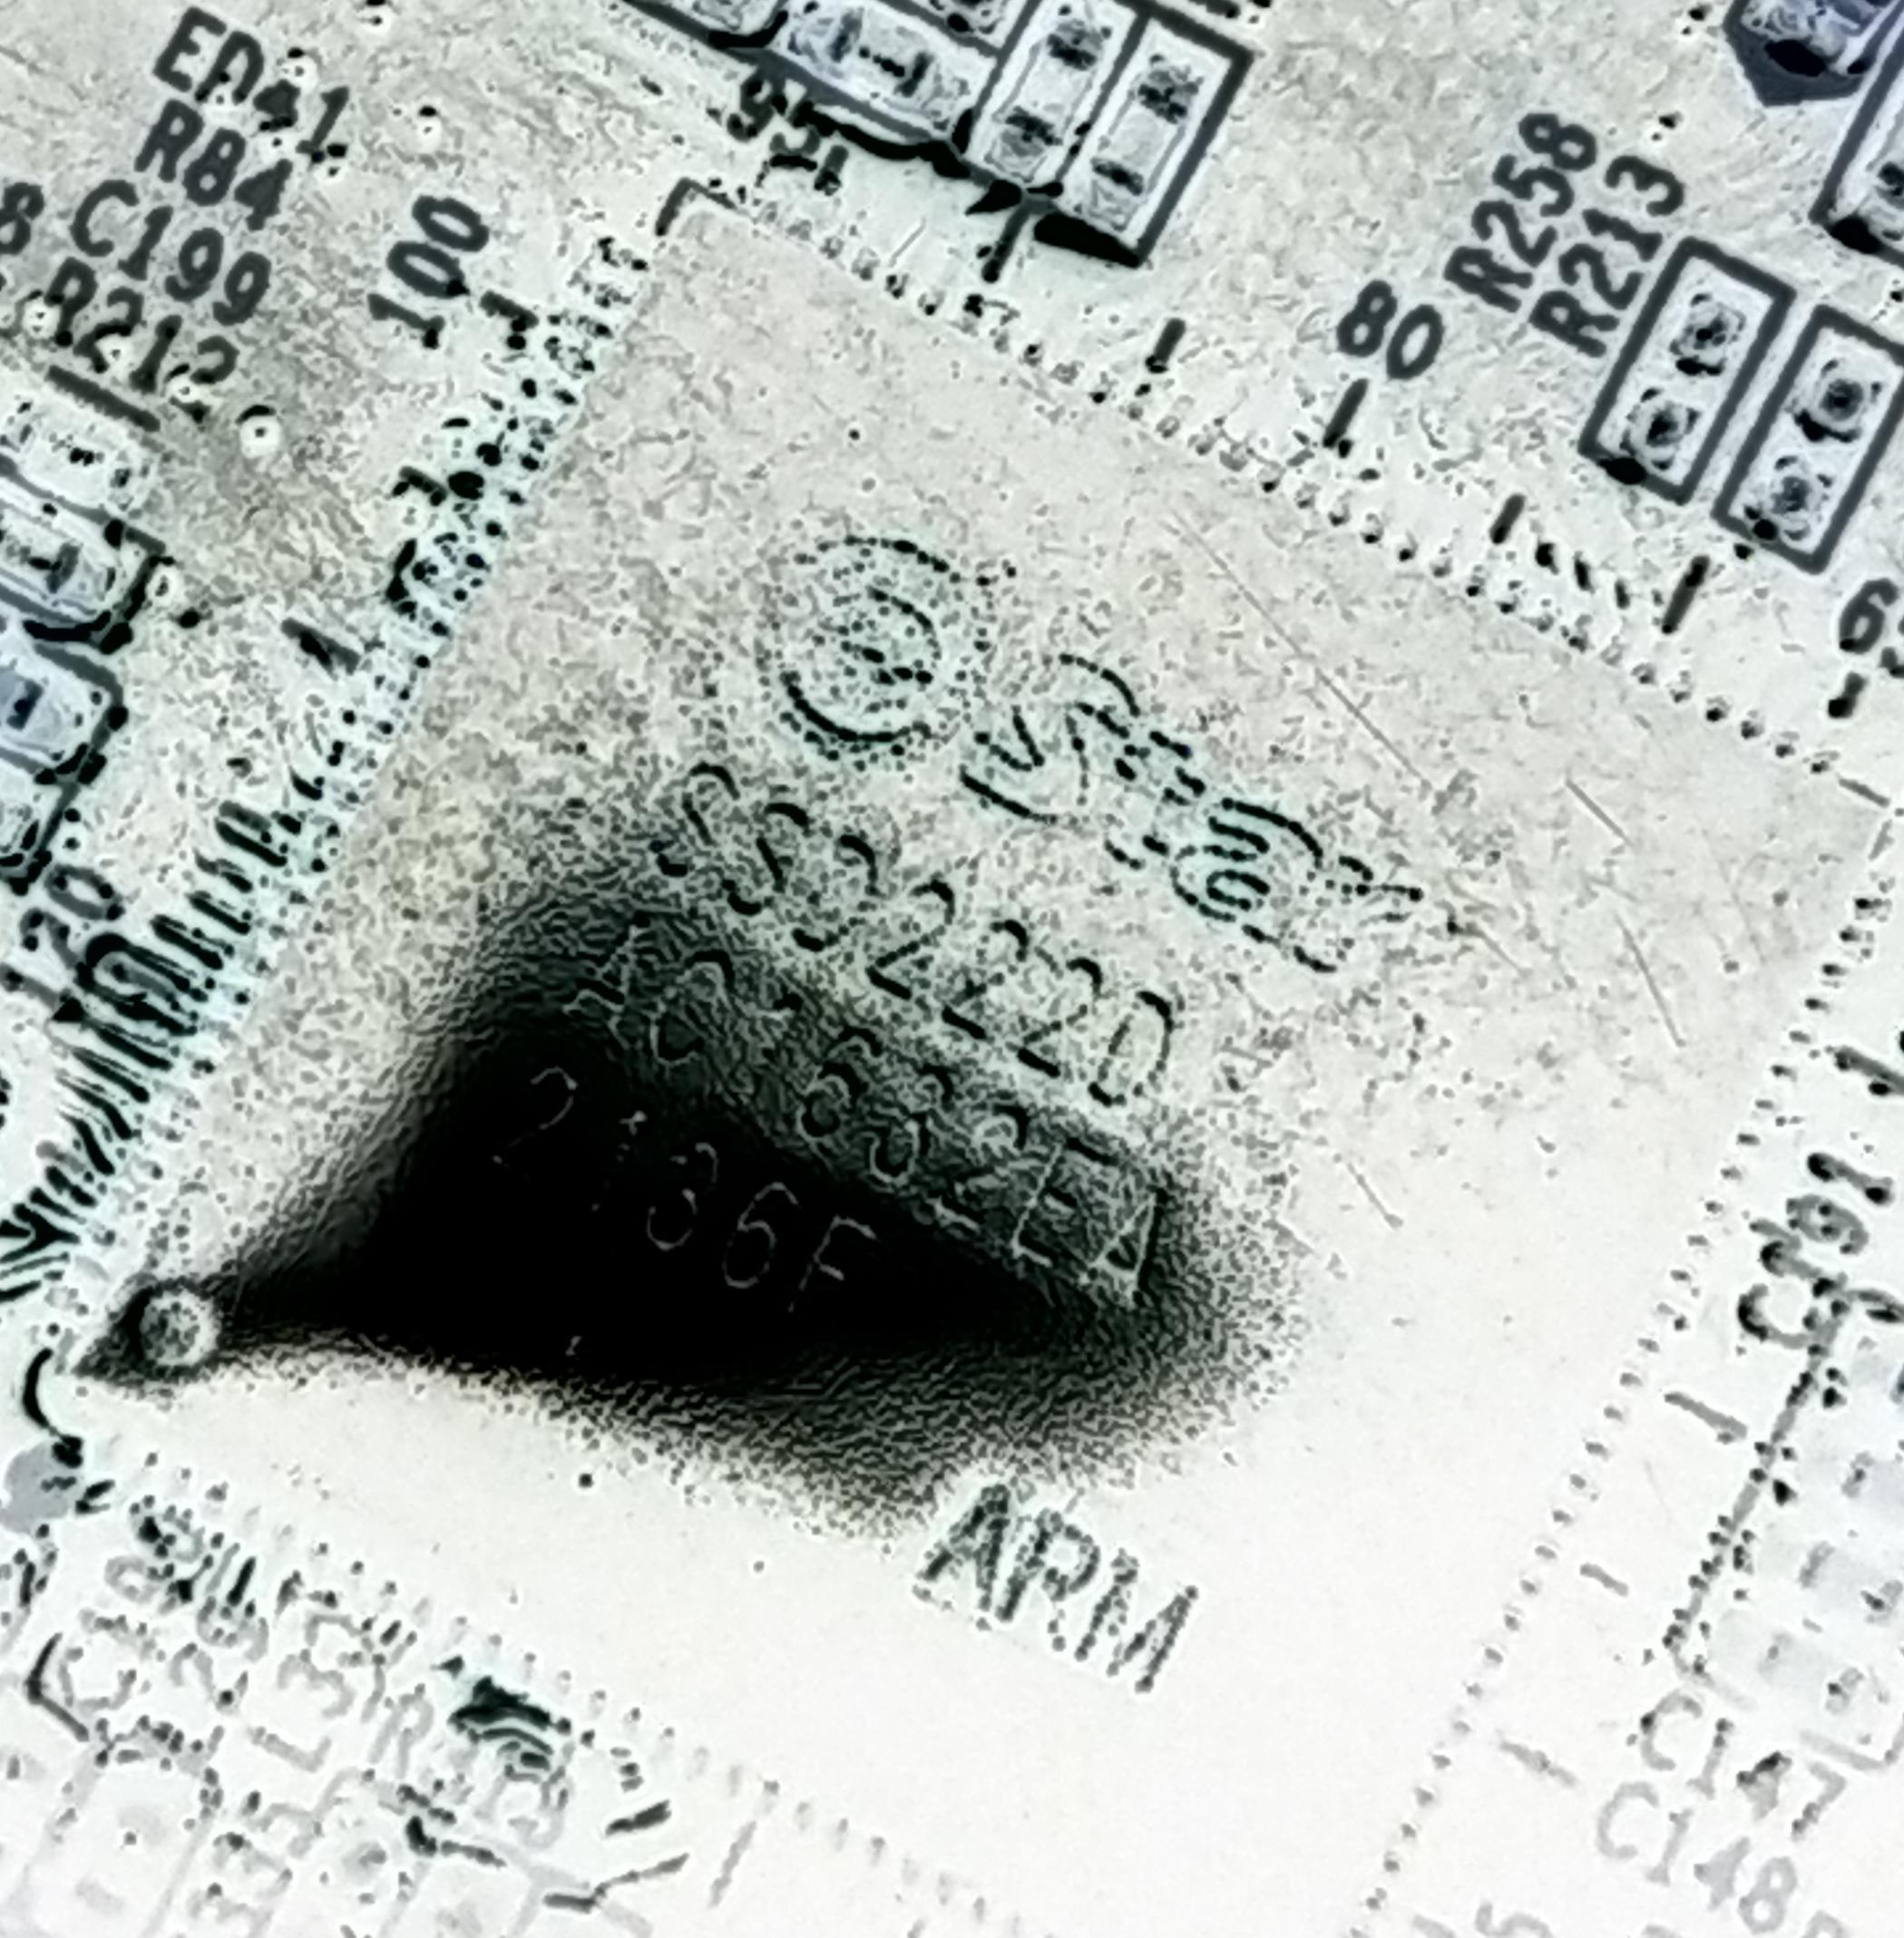 Picture with inverted color to show the model number of the CPU